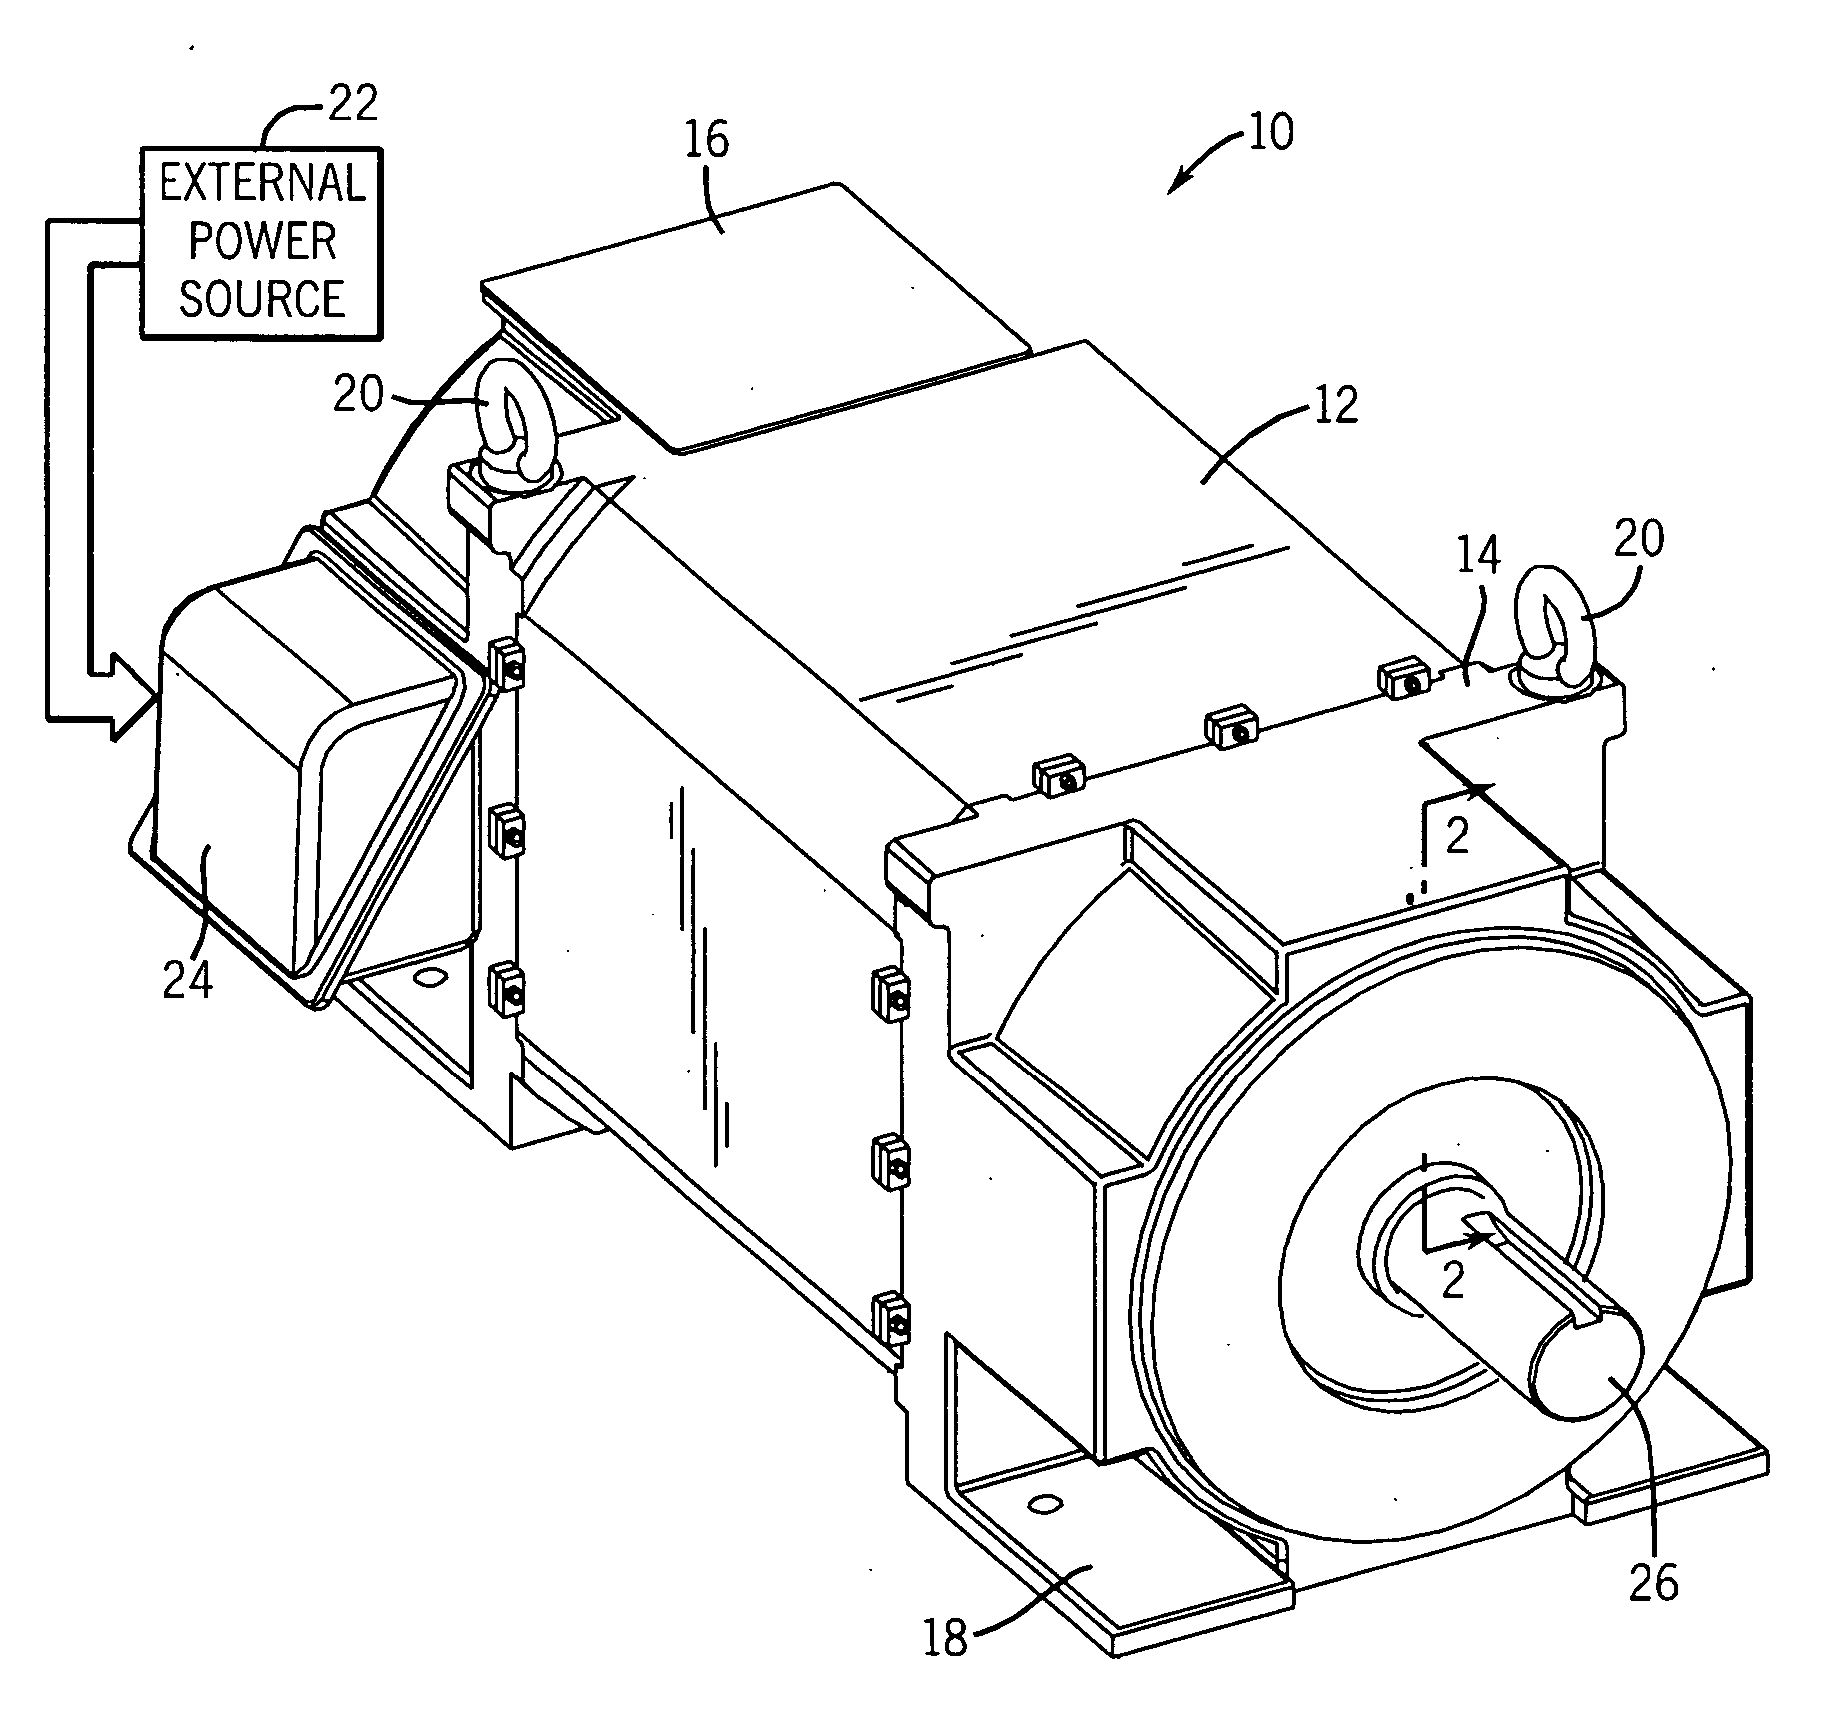 Rotor for an induction device